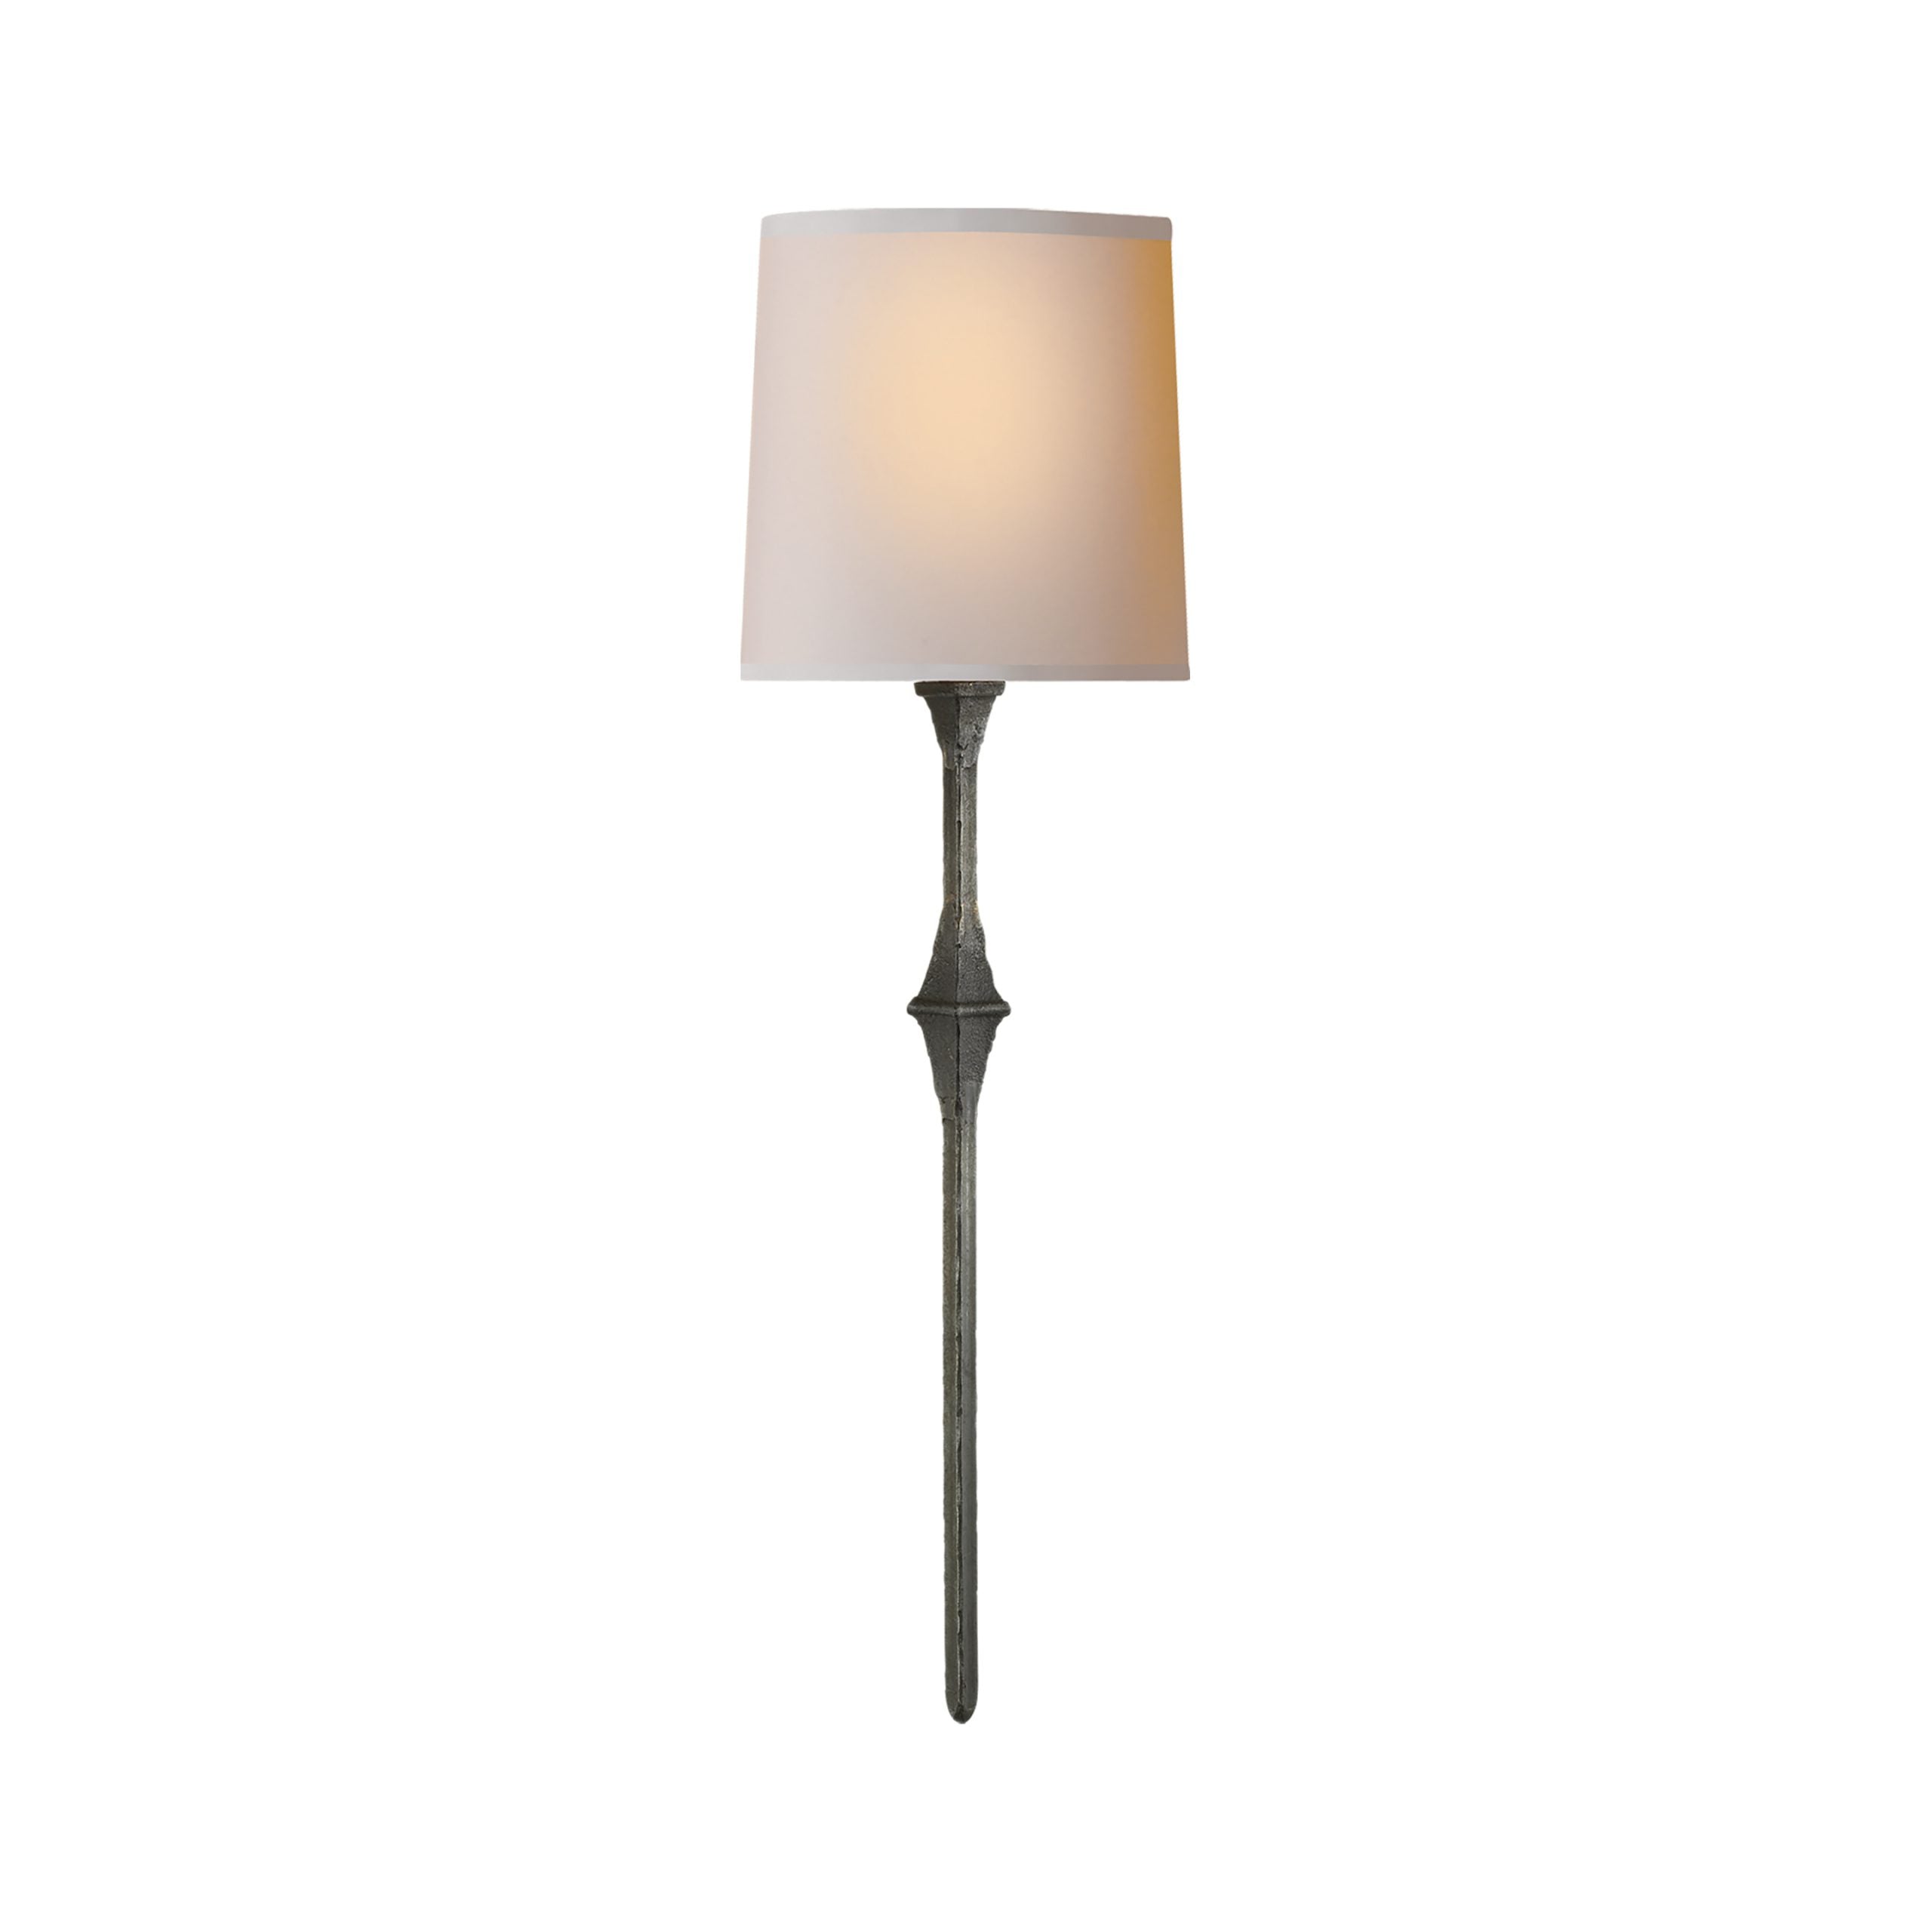 Studio VC Dauphine Wall Sconce